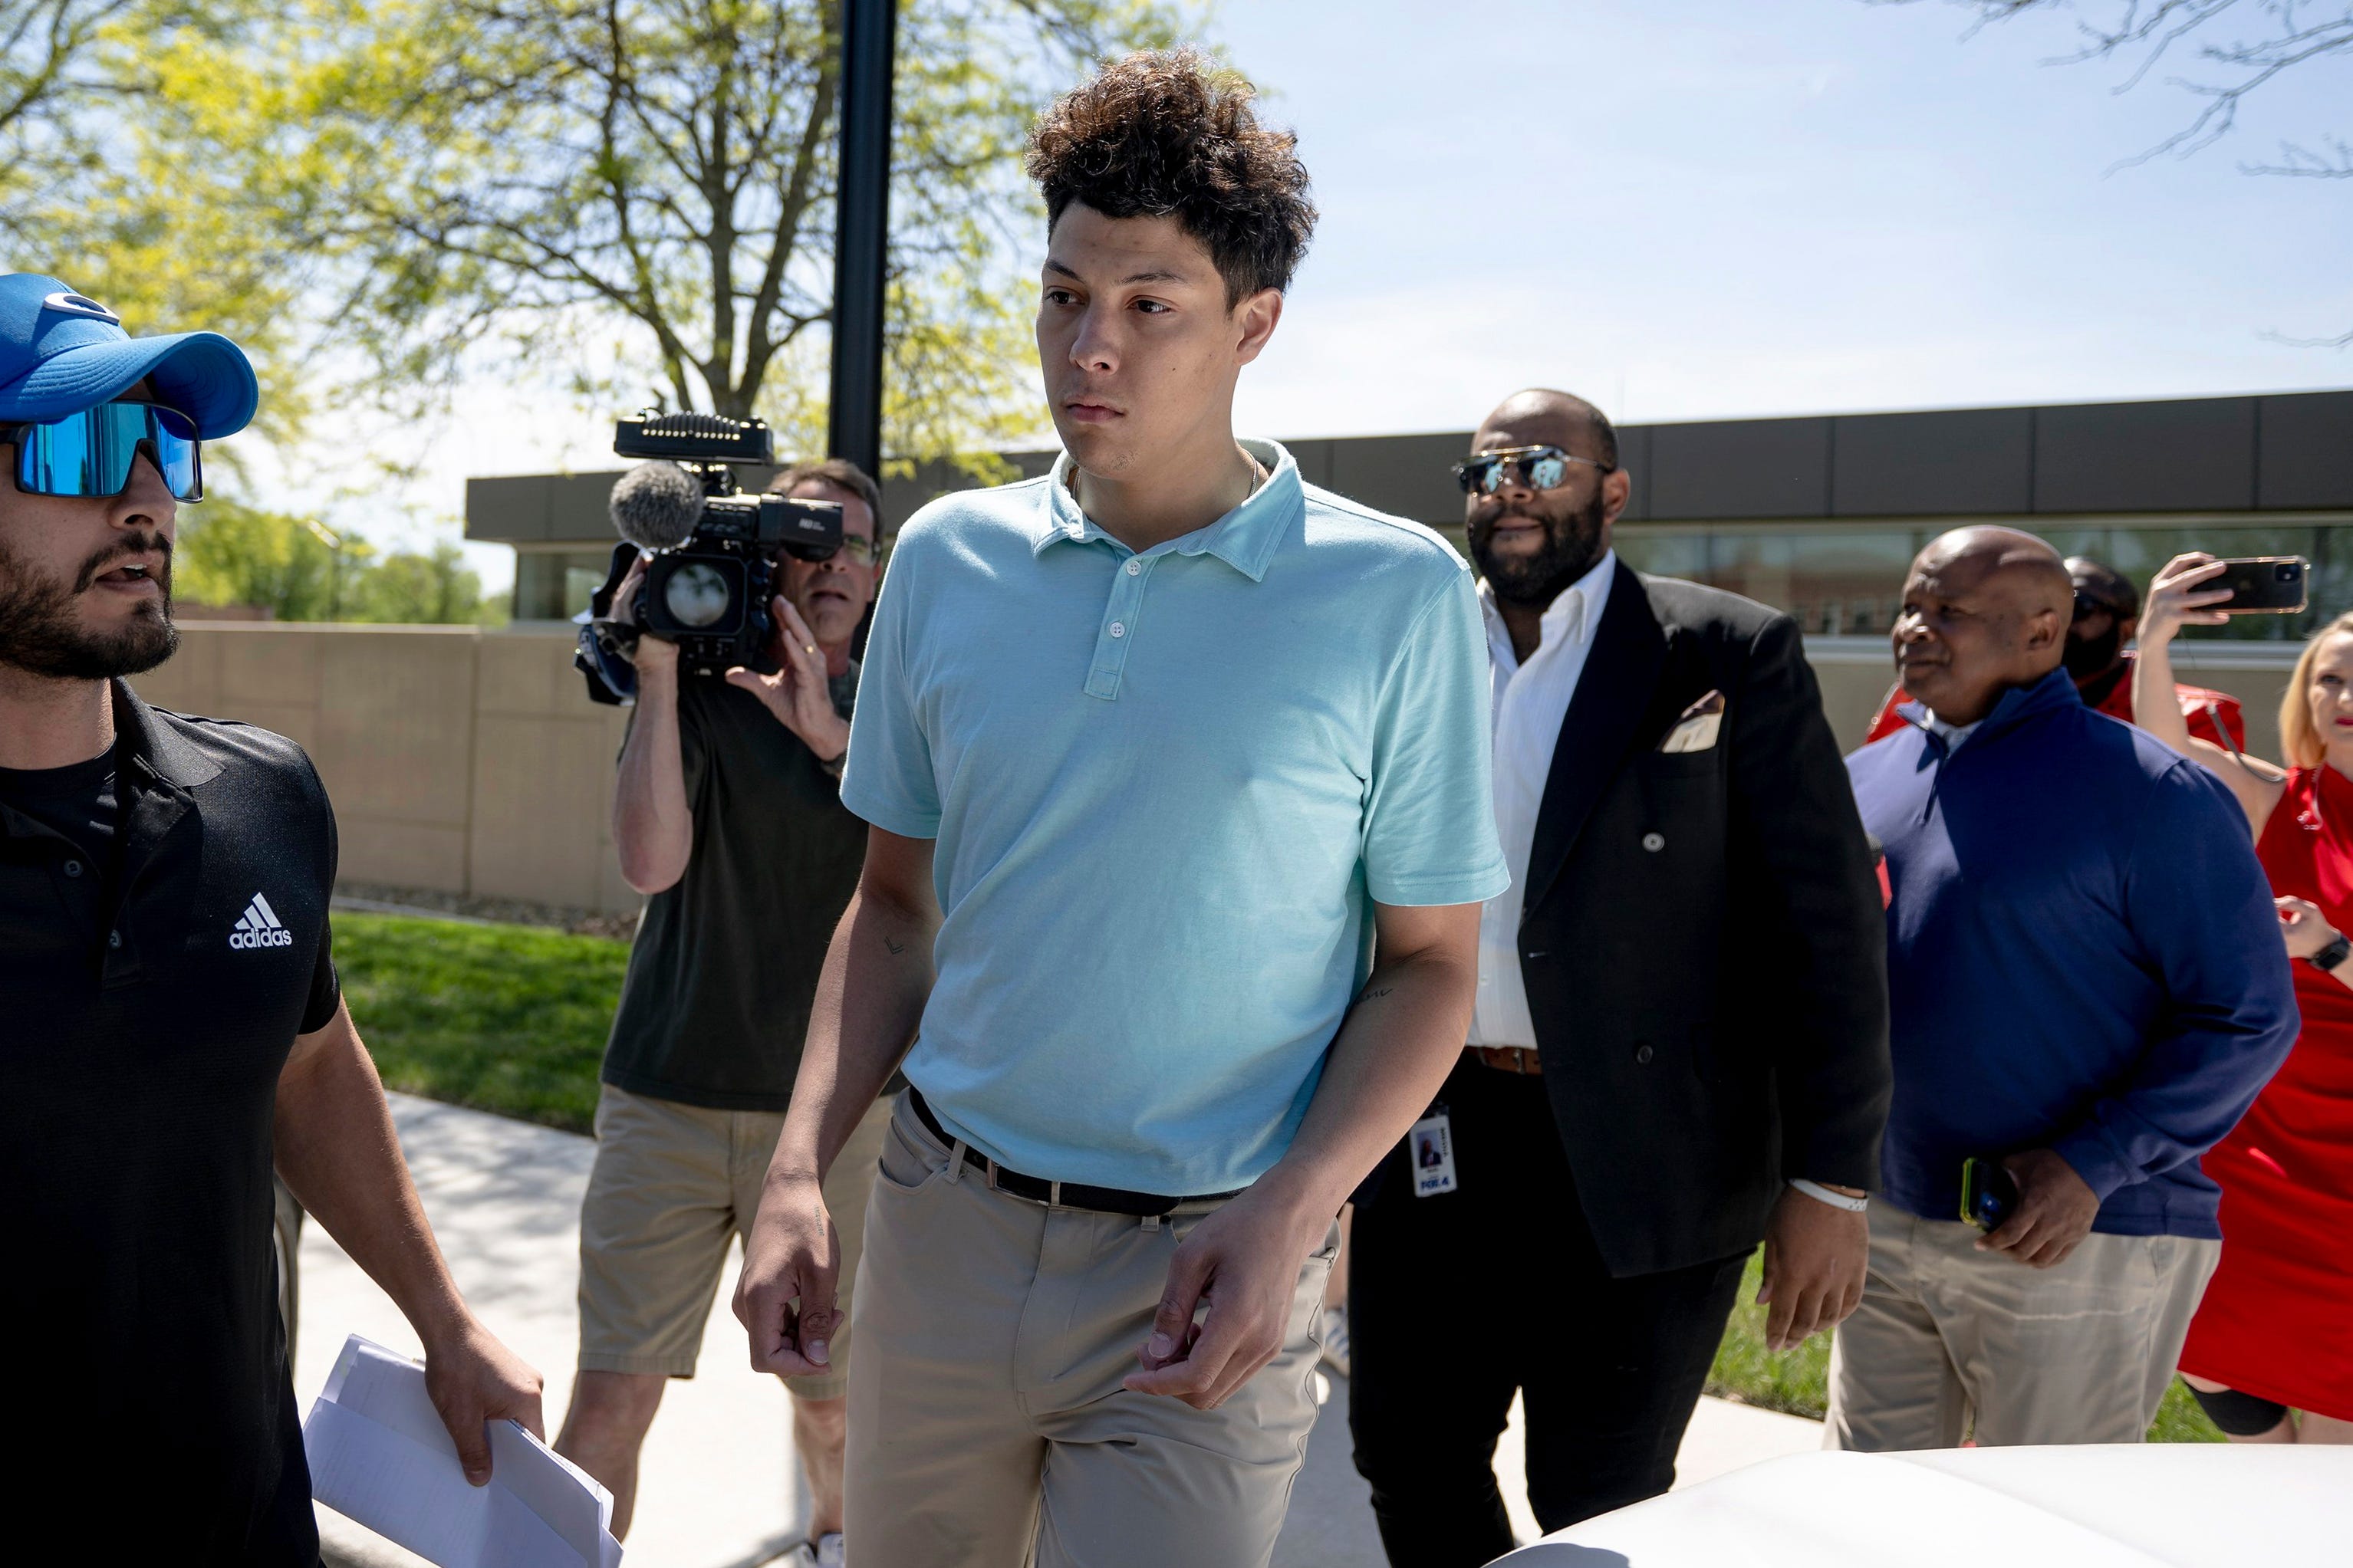 Jackson Mahomes forcibly kissed woman multiple times without consent, per court records